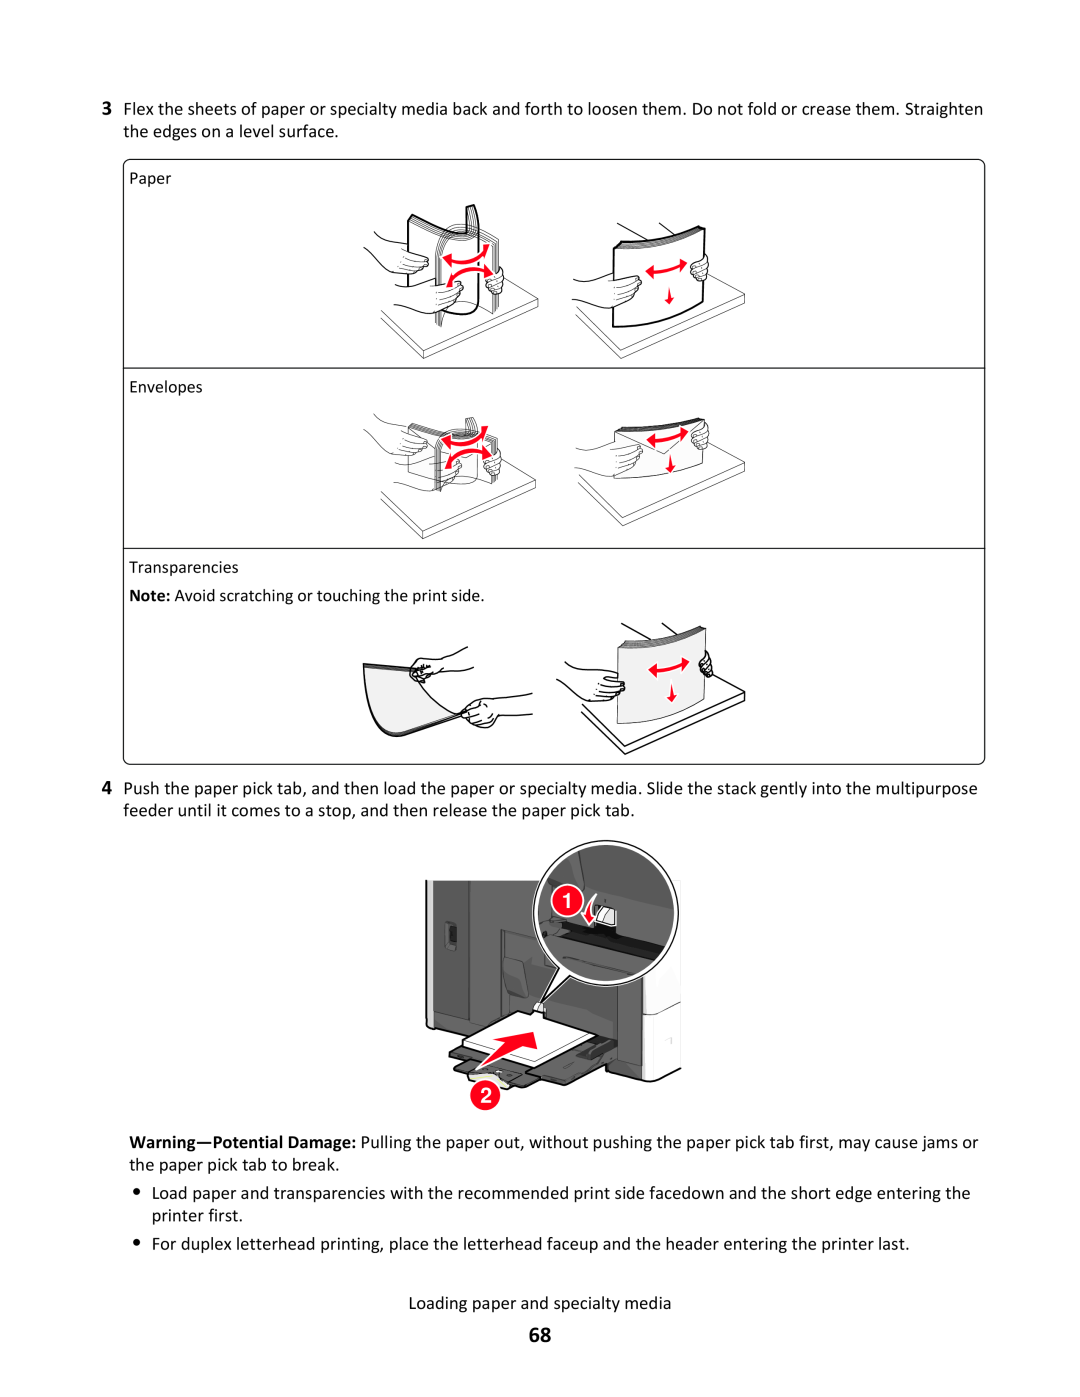 Lexmark C790 manual Paper Envelopes Transparencies, Note Avoid scratching or touching the print side 